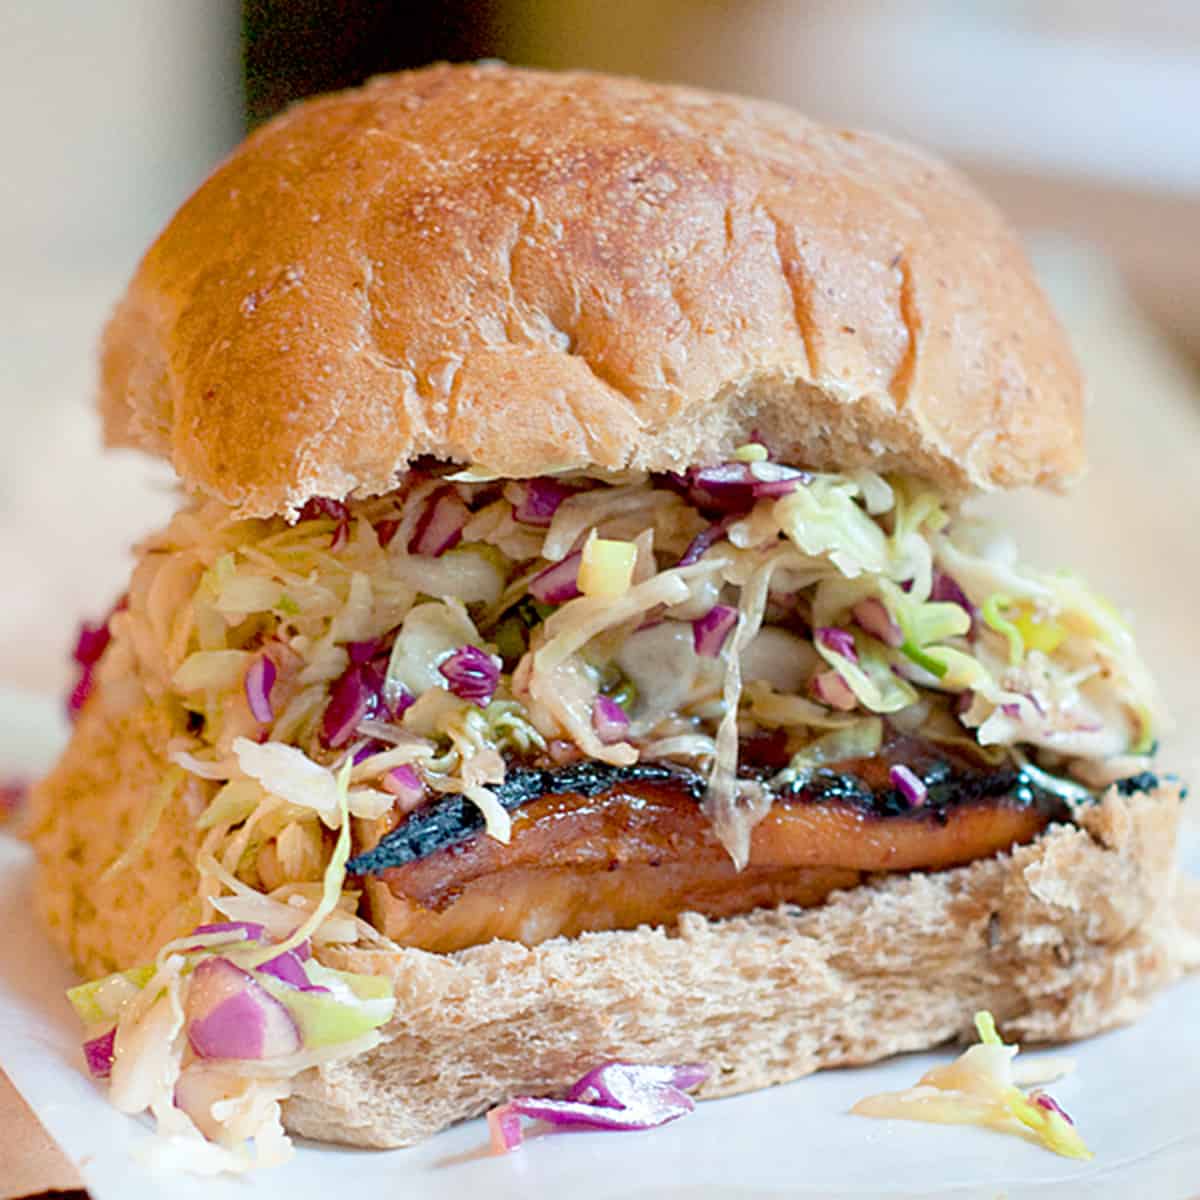 Asian barbecue sandwich on a white background.